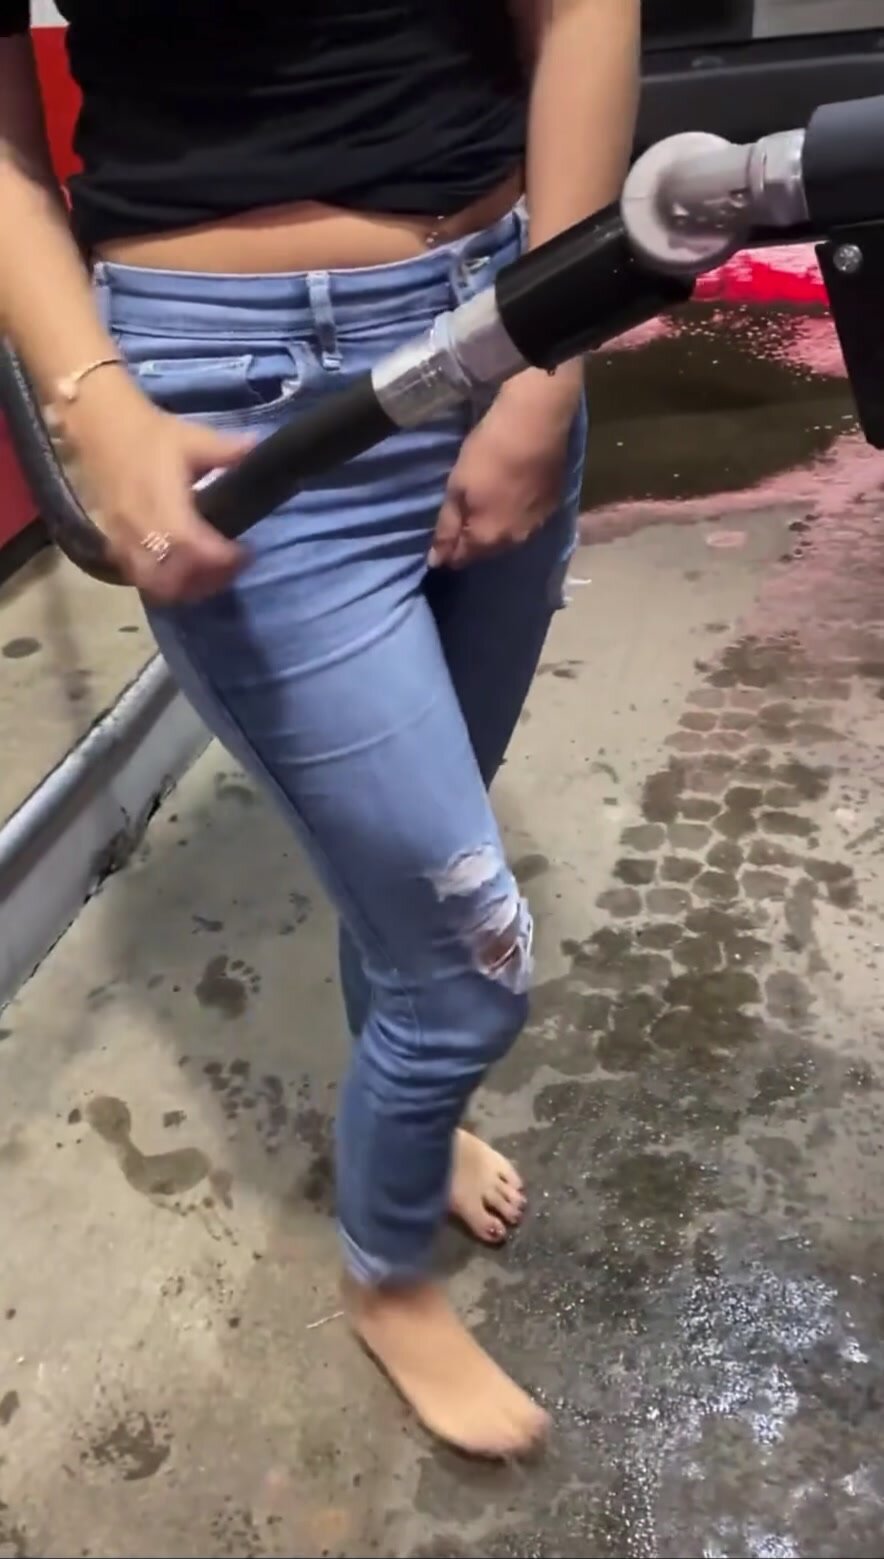 Wets her jeans at gas station